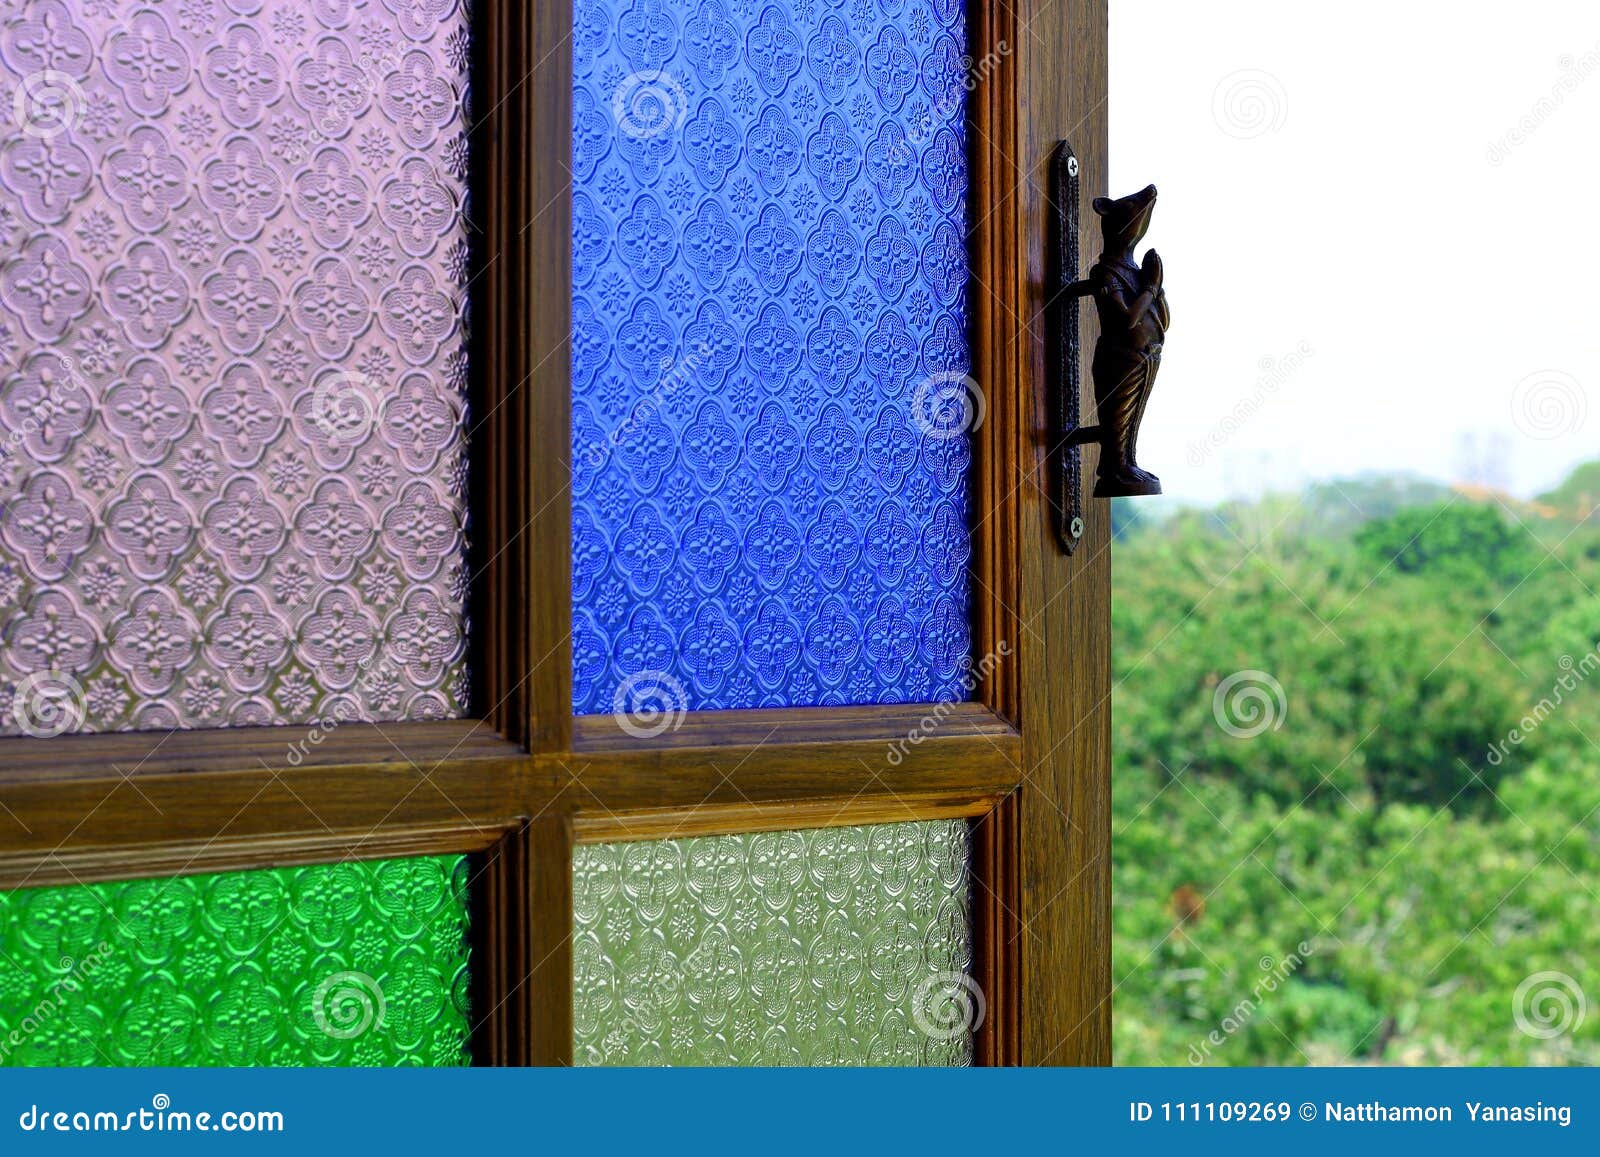 Color Glass Window Stock Image Image Of Mosaic Stained 111109269